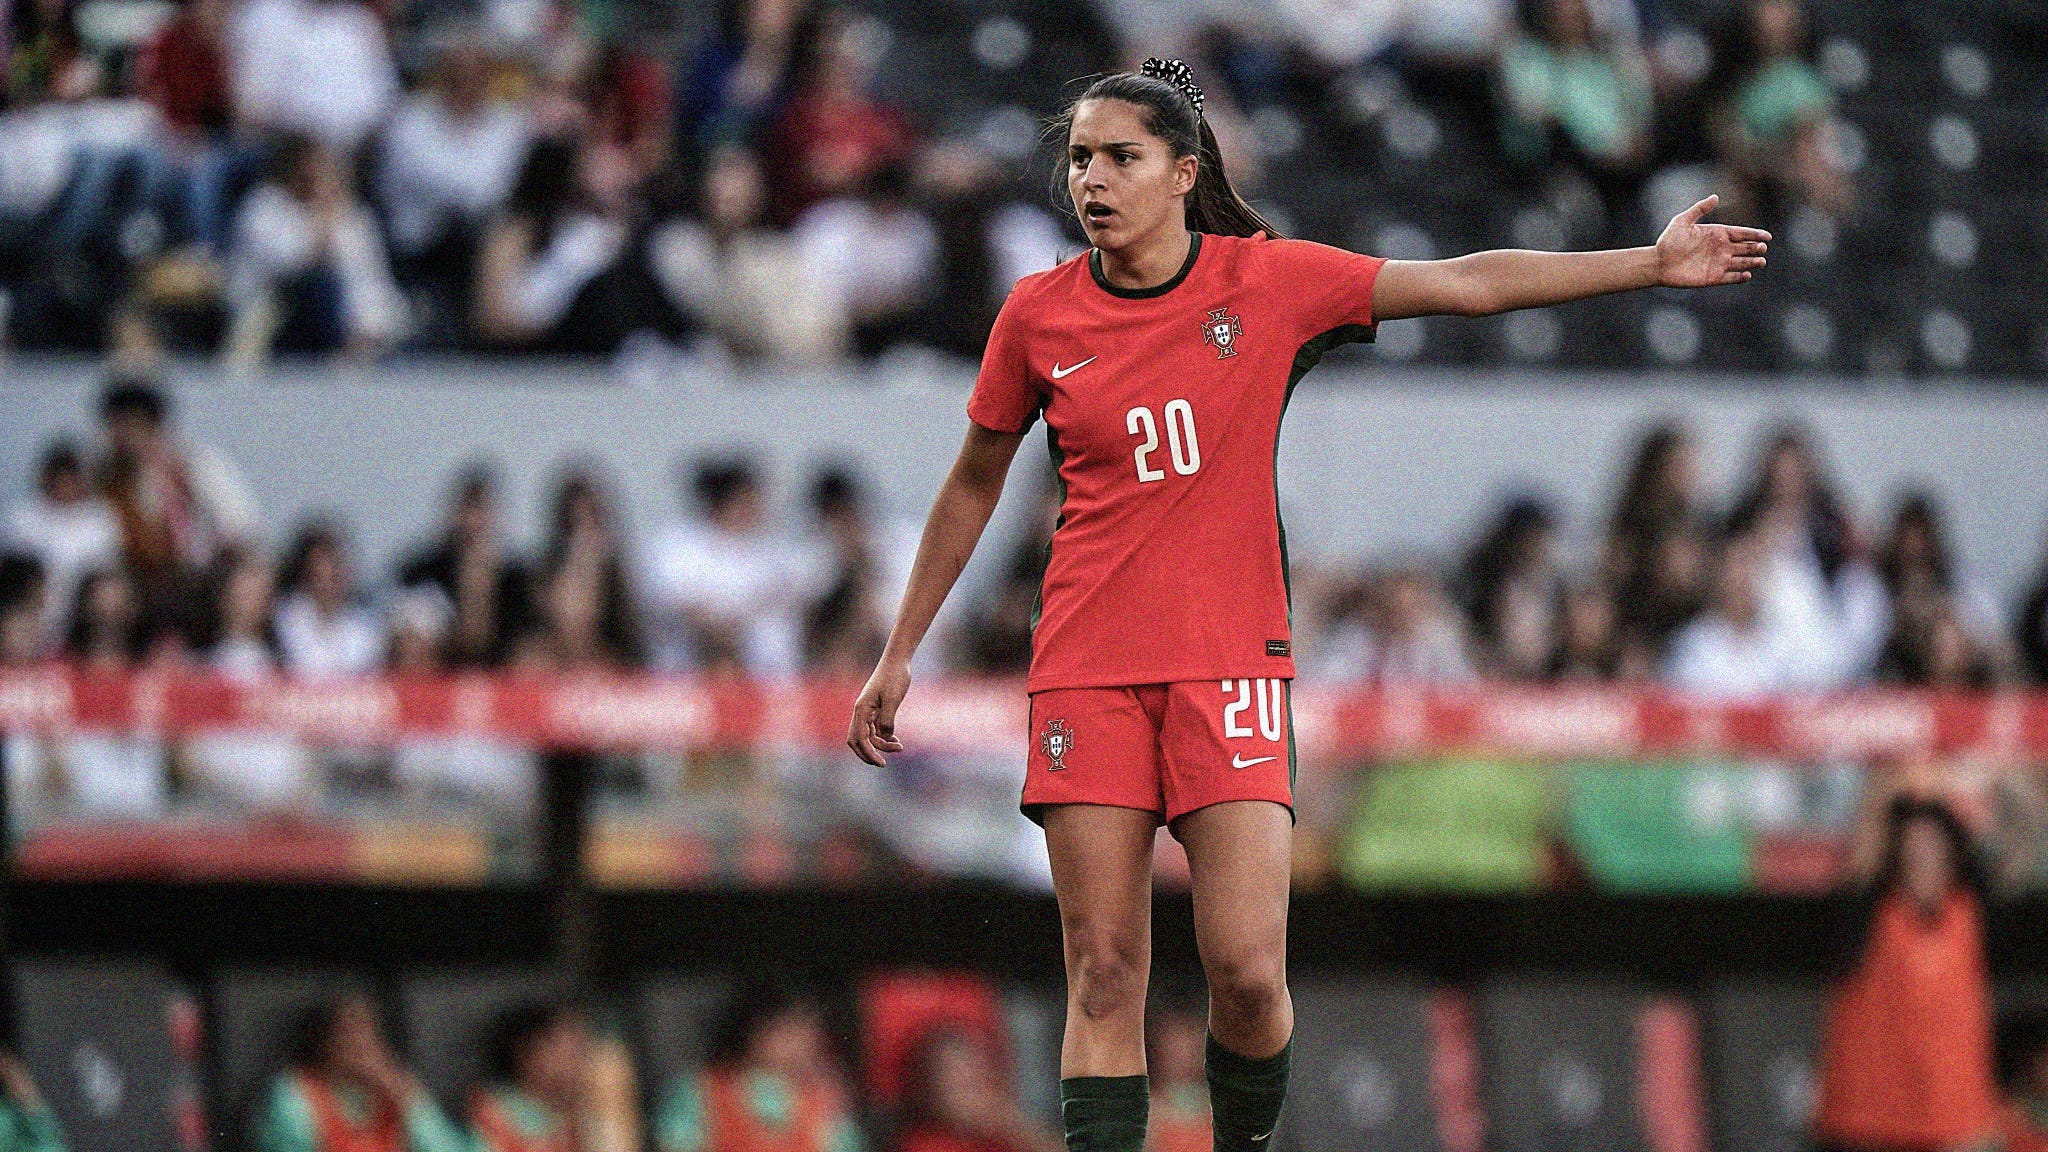 A photo of Kika Nazareth holding her arm out while playing for Portugal